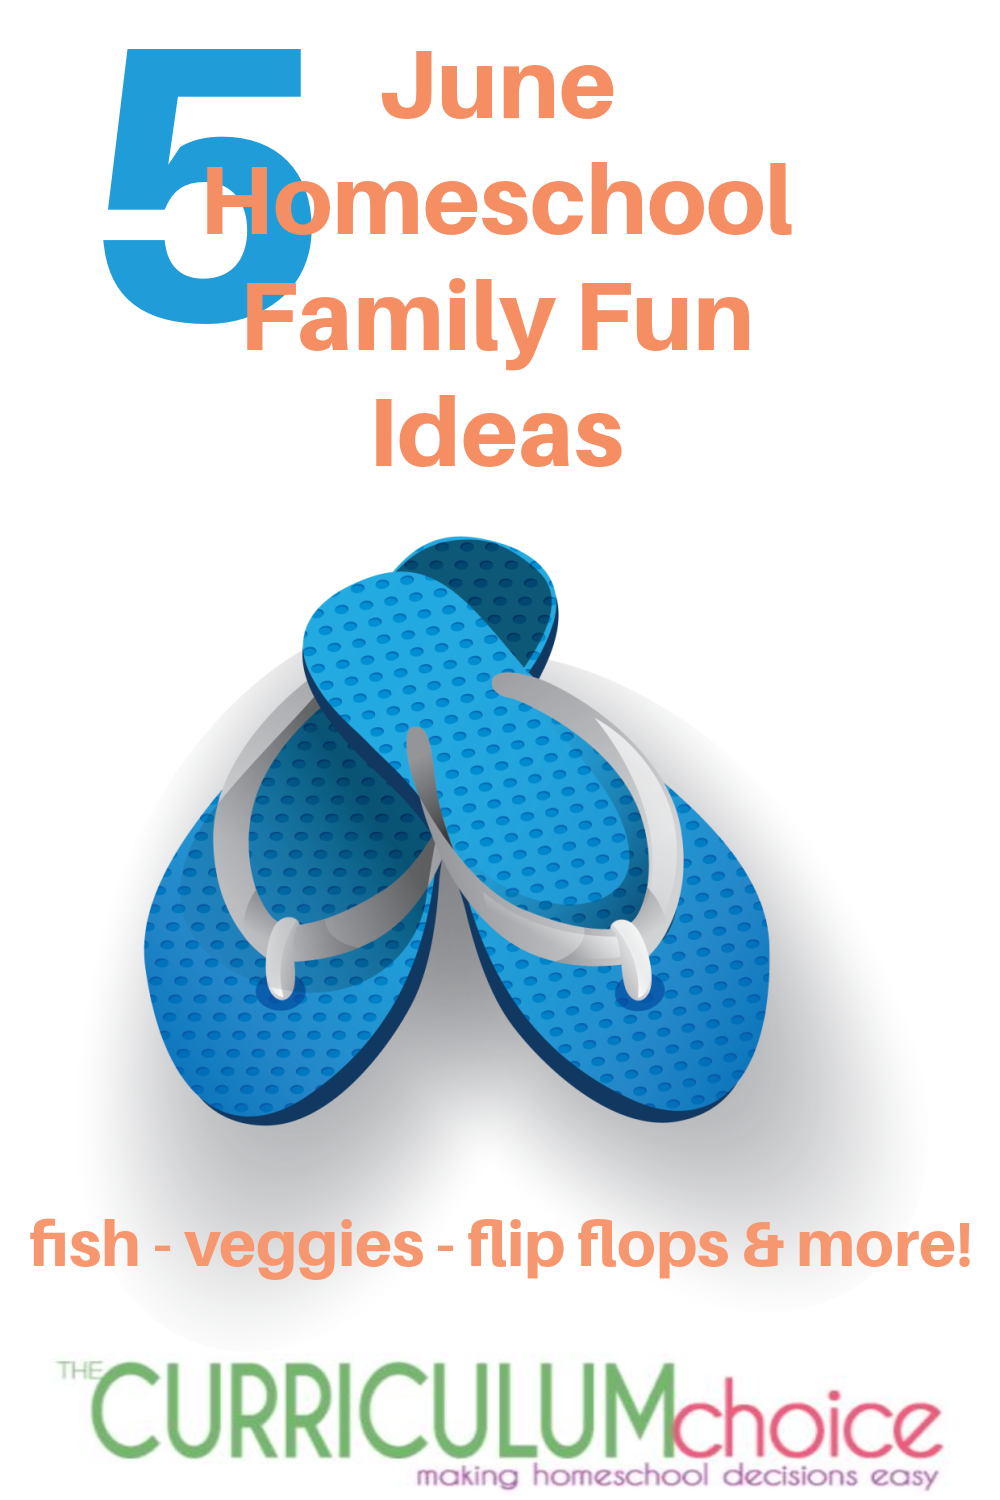 Create sizzling, lasting memories with these June homeschool family fun ideas! Flip flops, fish, veggies and more!